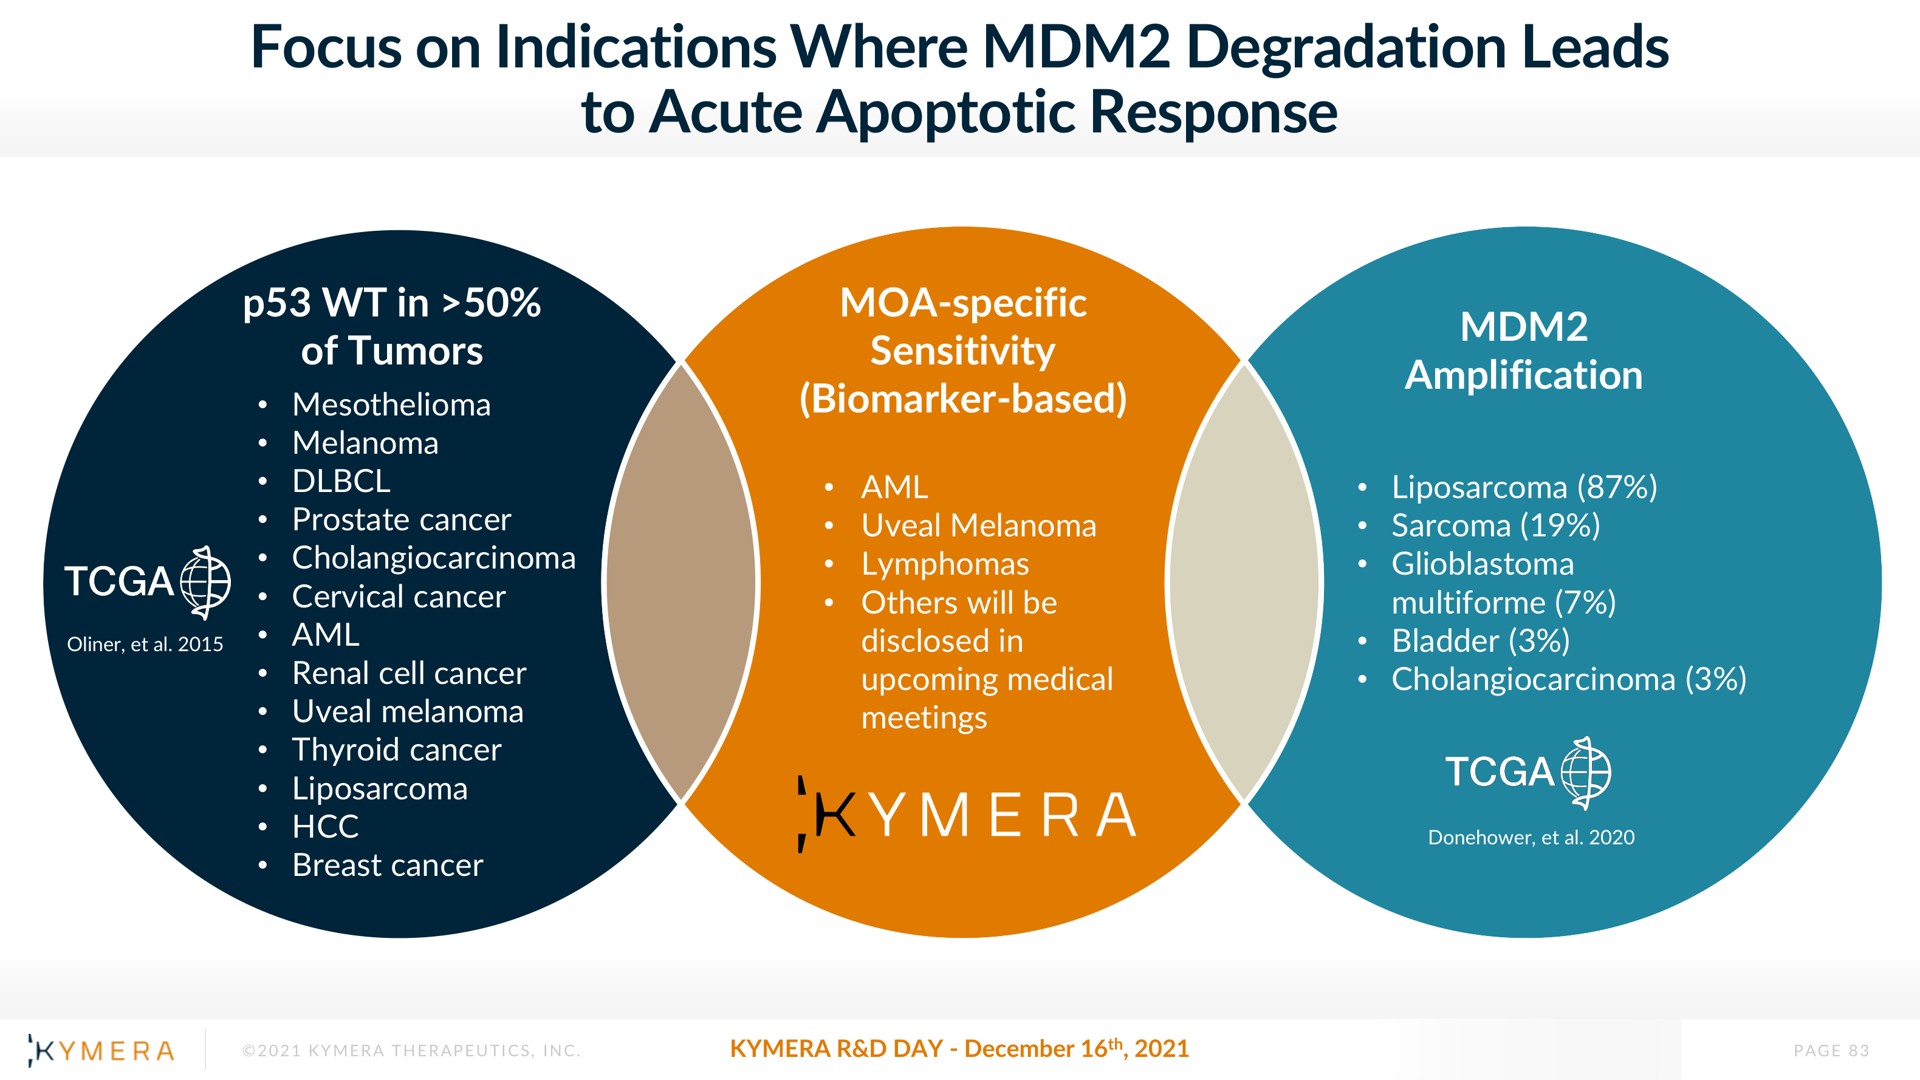 focus on indications where degradation leads to acute response ree | Kymera